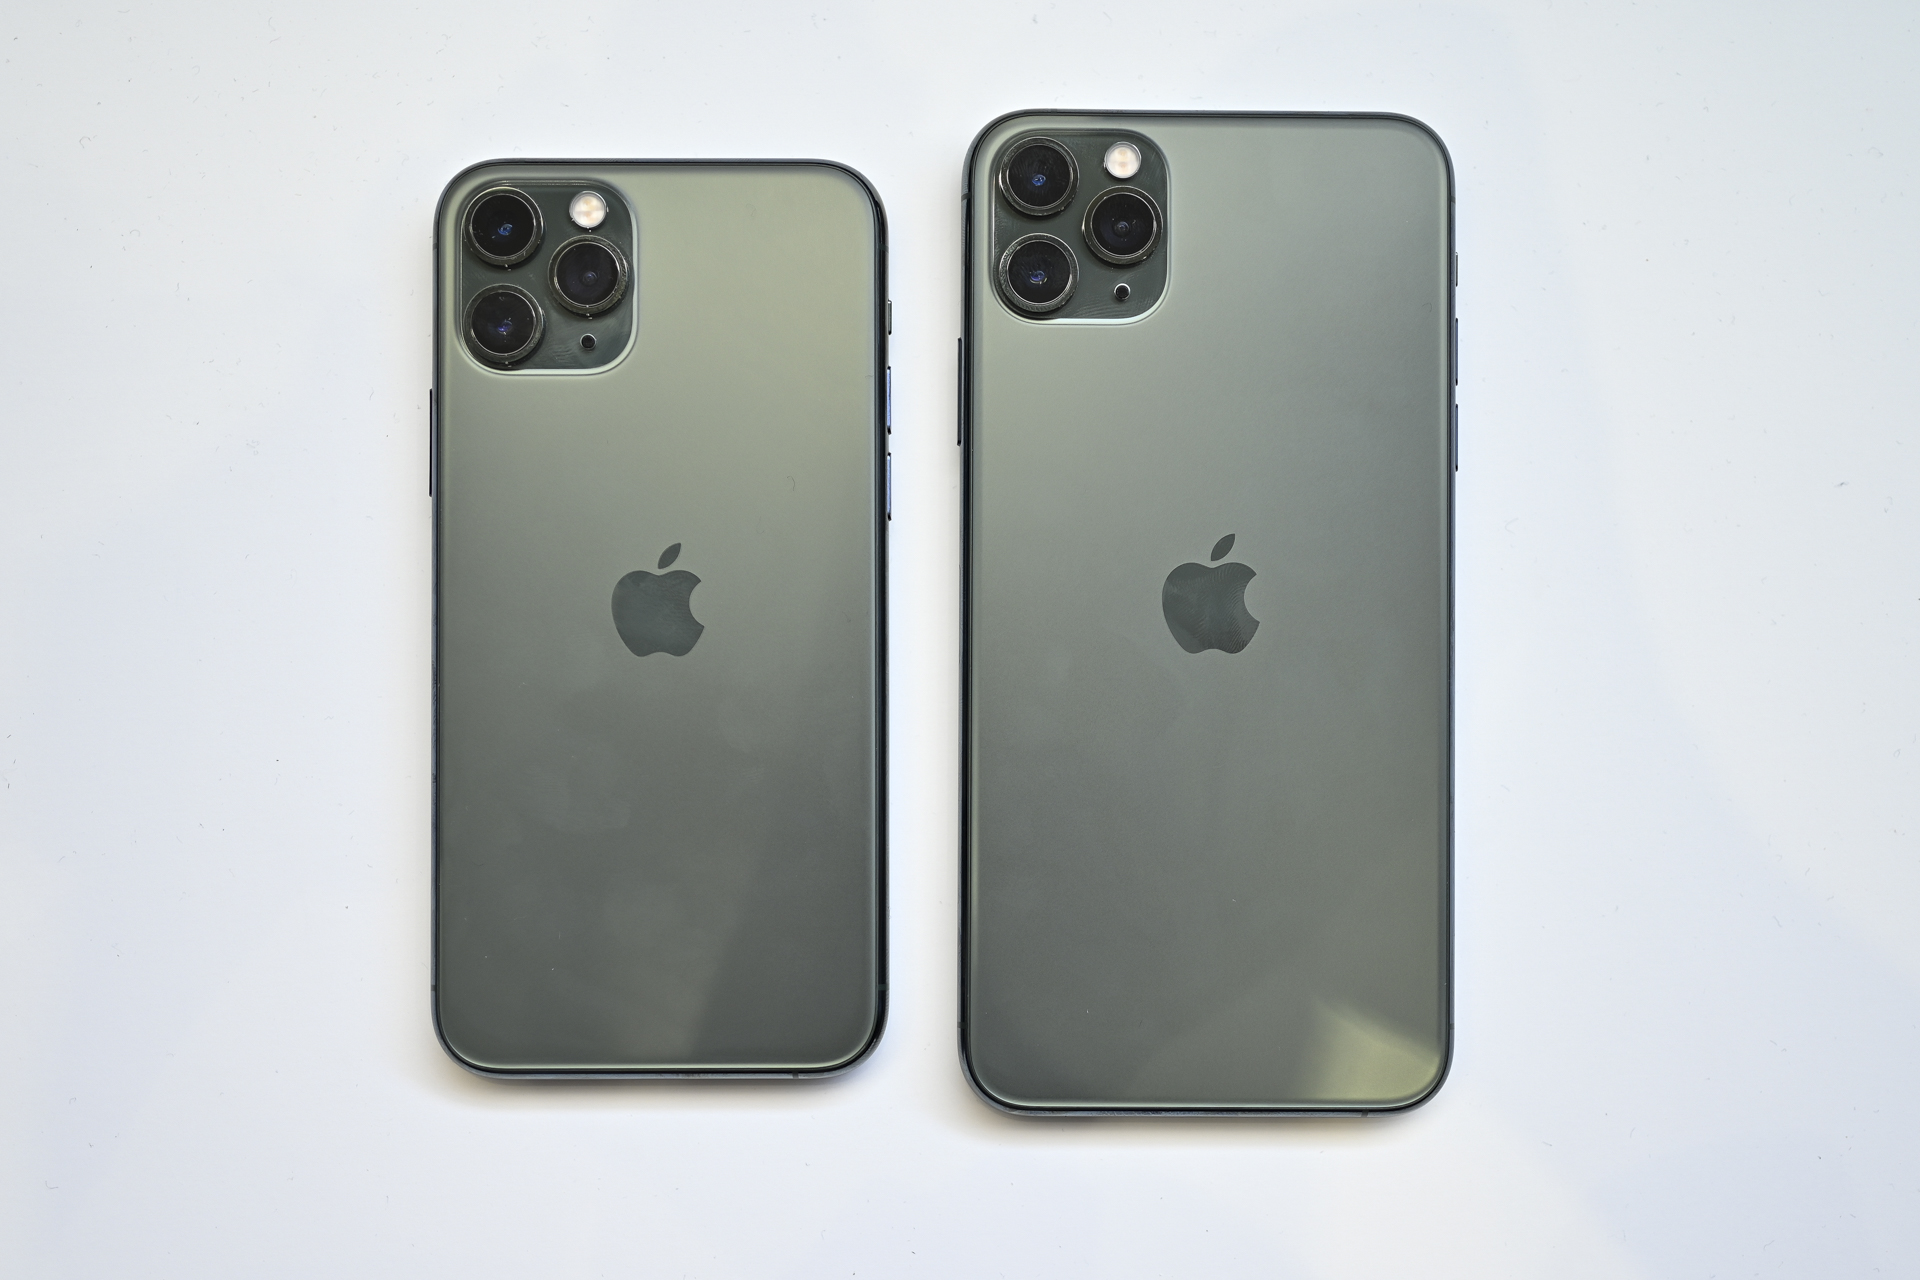 iPhone 11 vs iPhone 11 Pro vs iPhone 11 Pro Max: How to decide